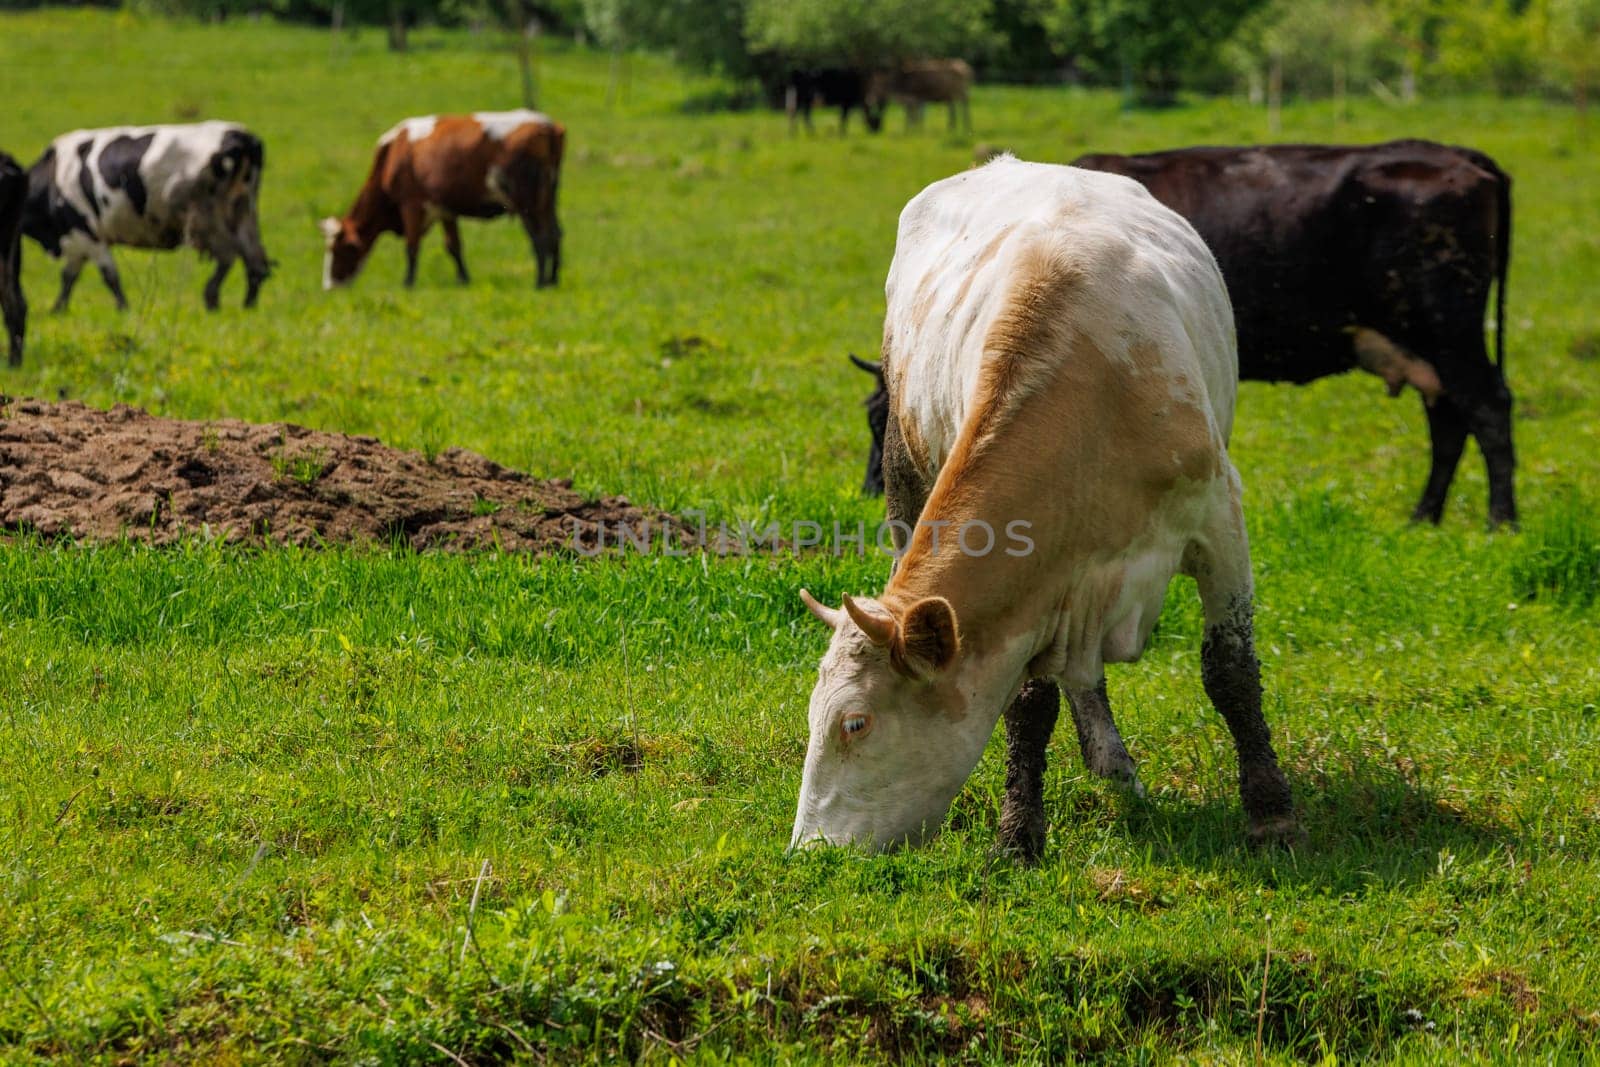 Cows grazing on grass in a natural grassland landscape by z1b